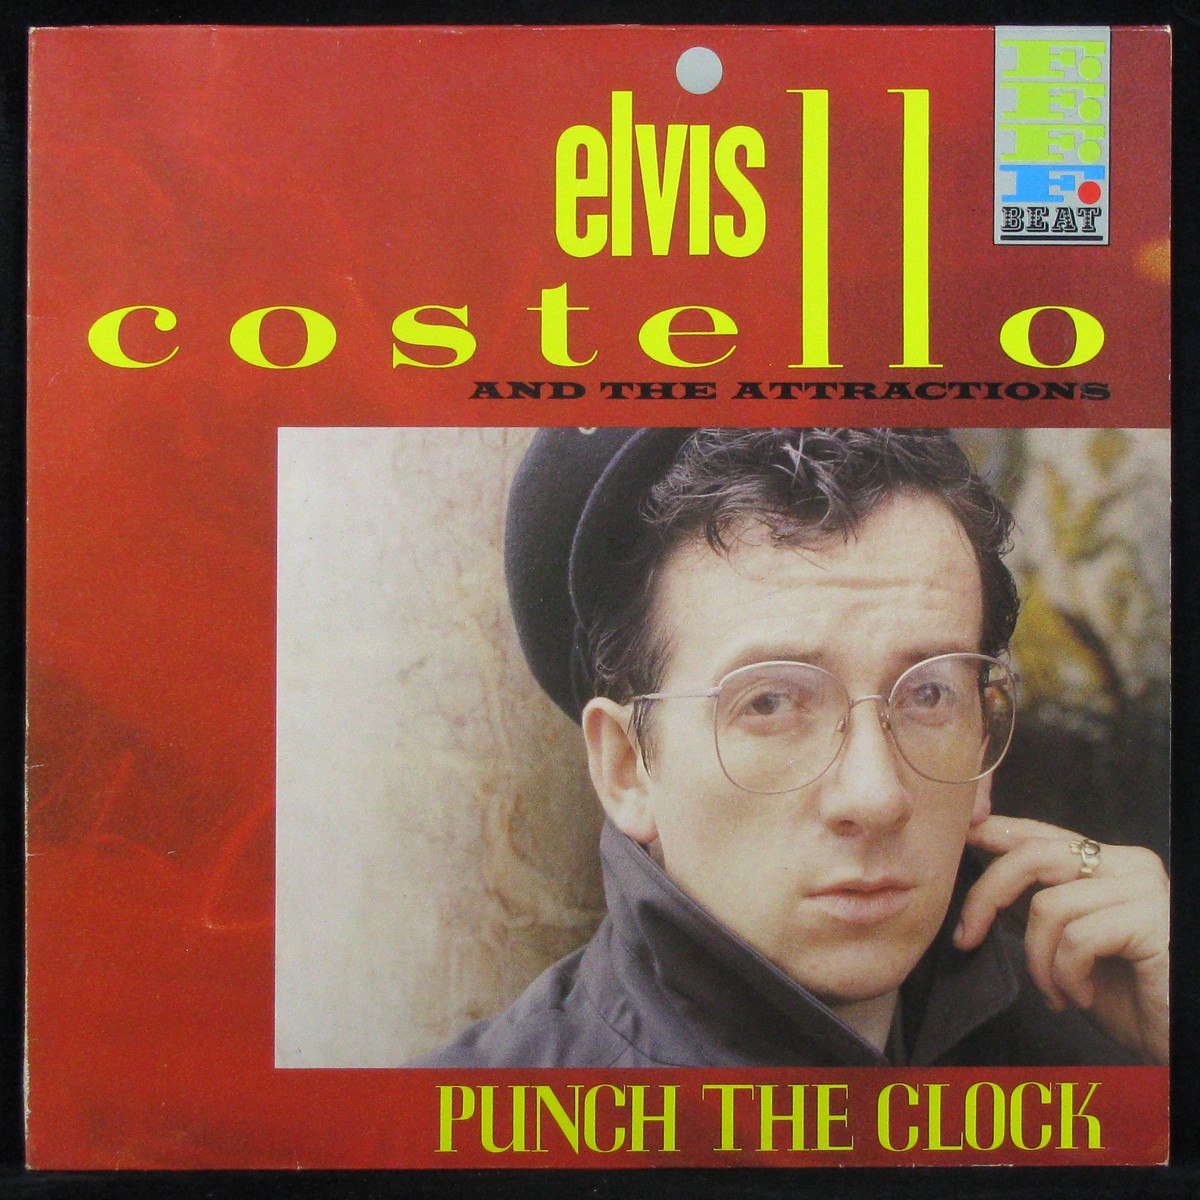 Punch The Clock